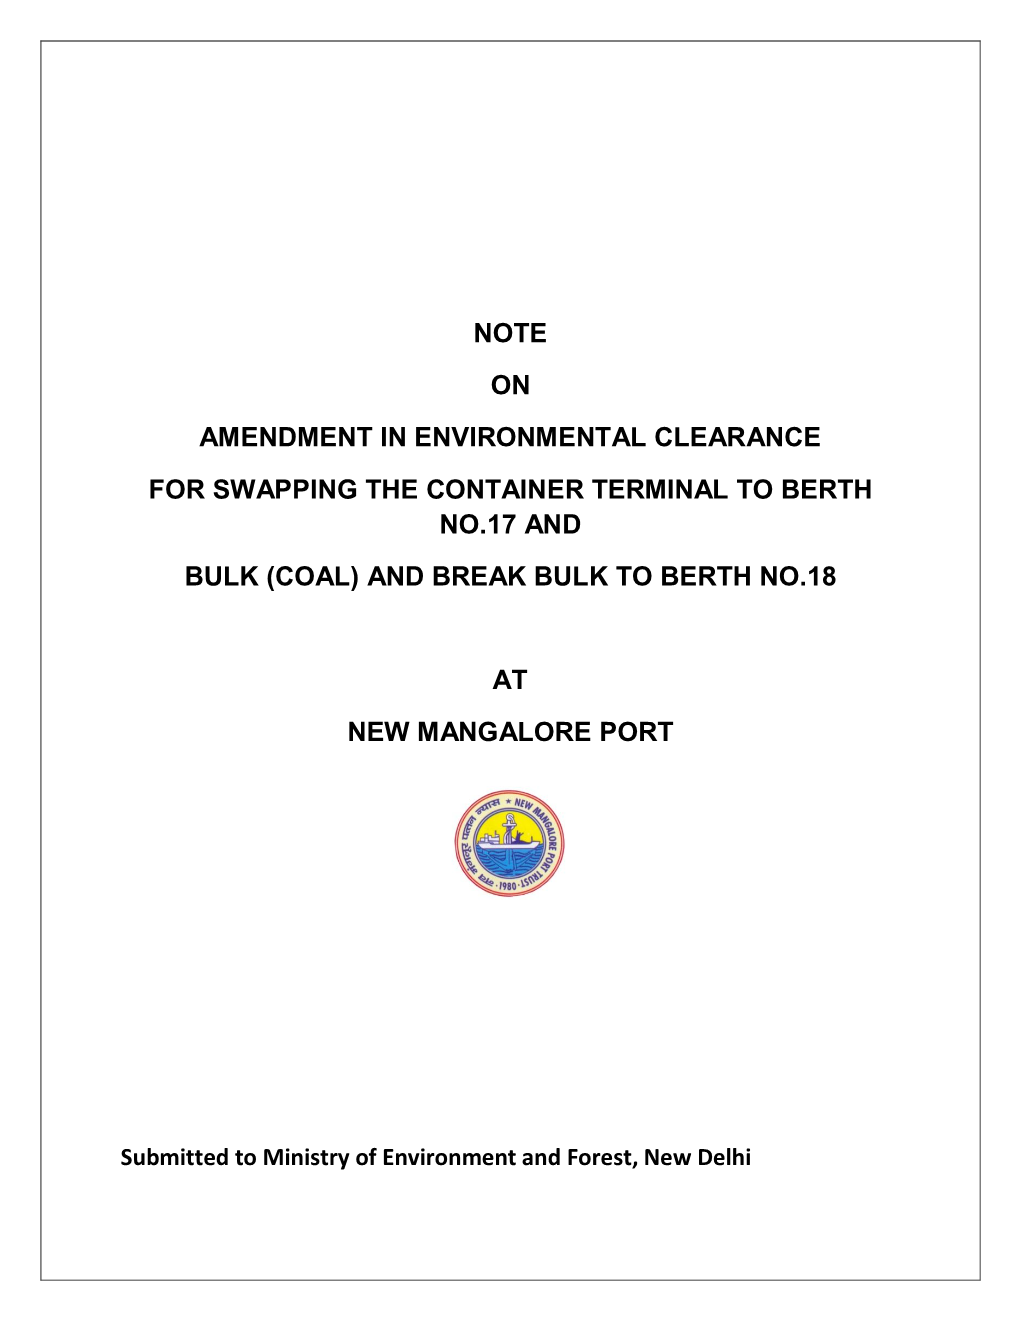 Note on Amendment in Environmental Clearance for Swapping the Container Terminal to Berth No.17 and Bulk (Coal) and Break Bulk to Berth No.18